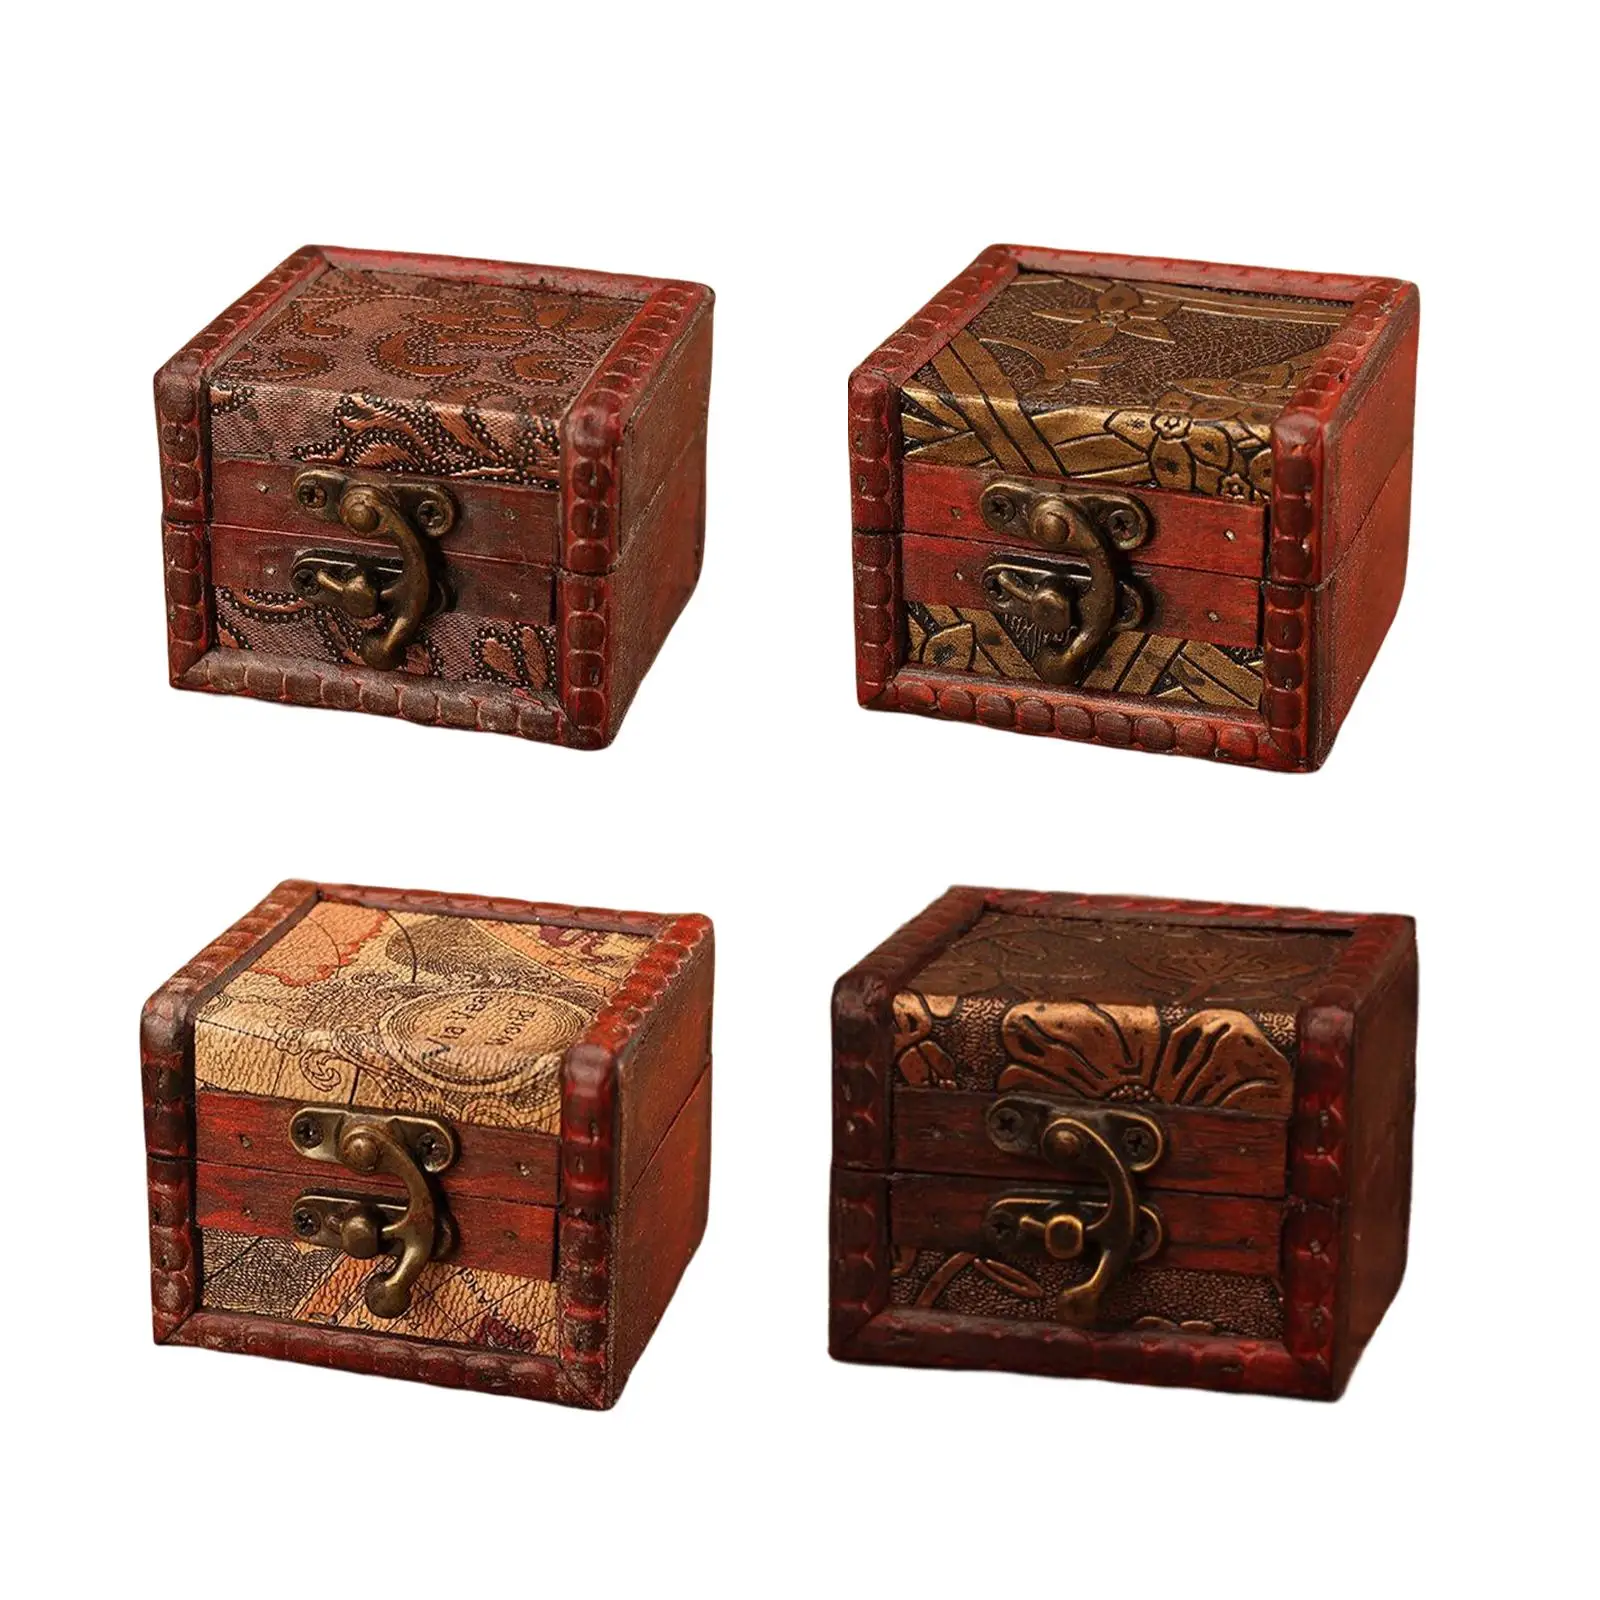 Wooden Jewelry Box Organizer Storage Case for Brooches Hairpins Necklaces watch Decoration